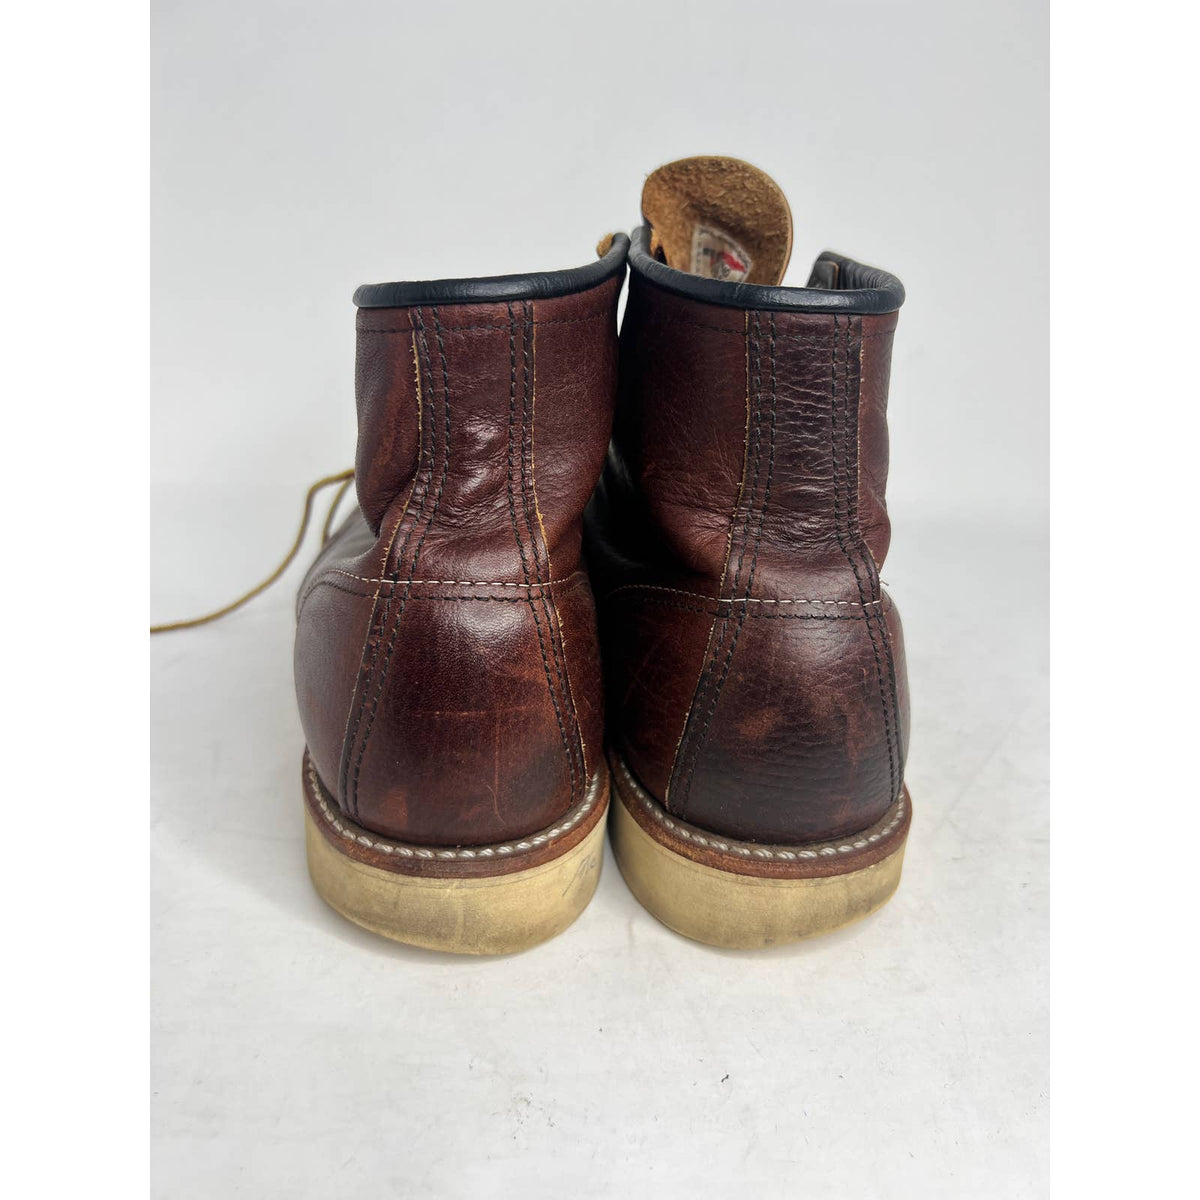 Red Wing 8138 Boots Sz.11 D